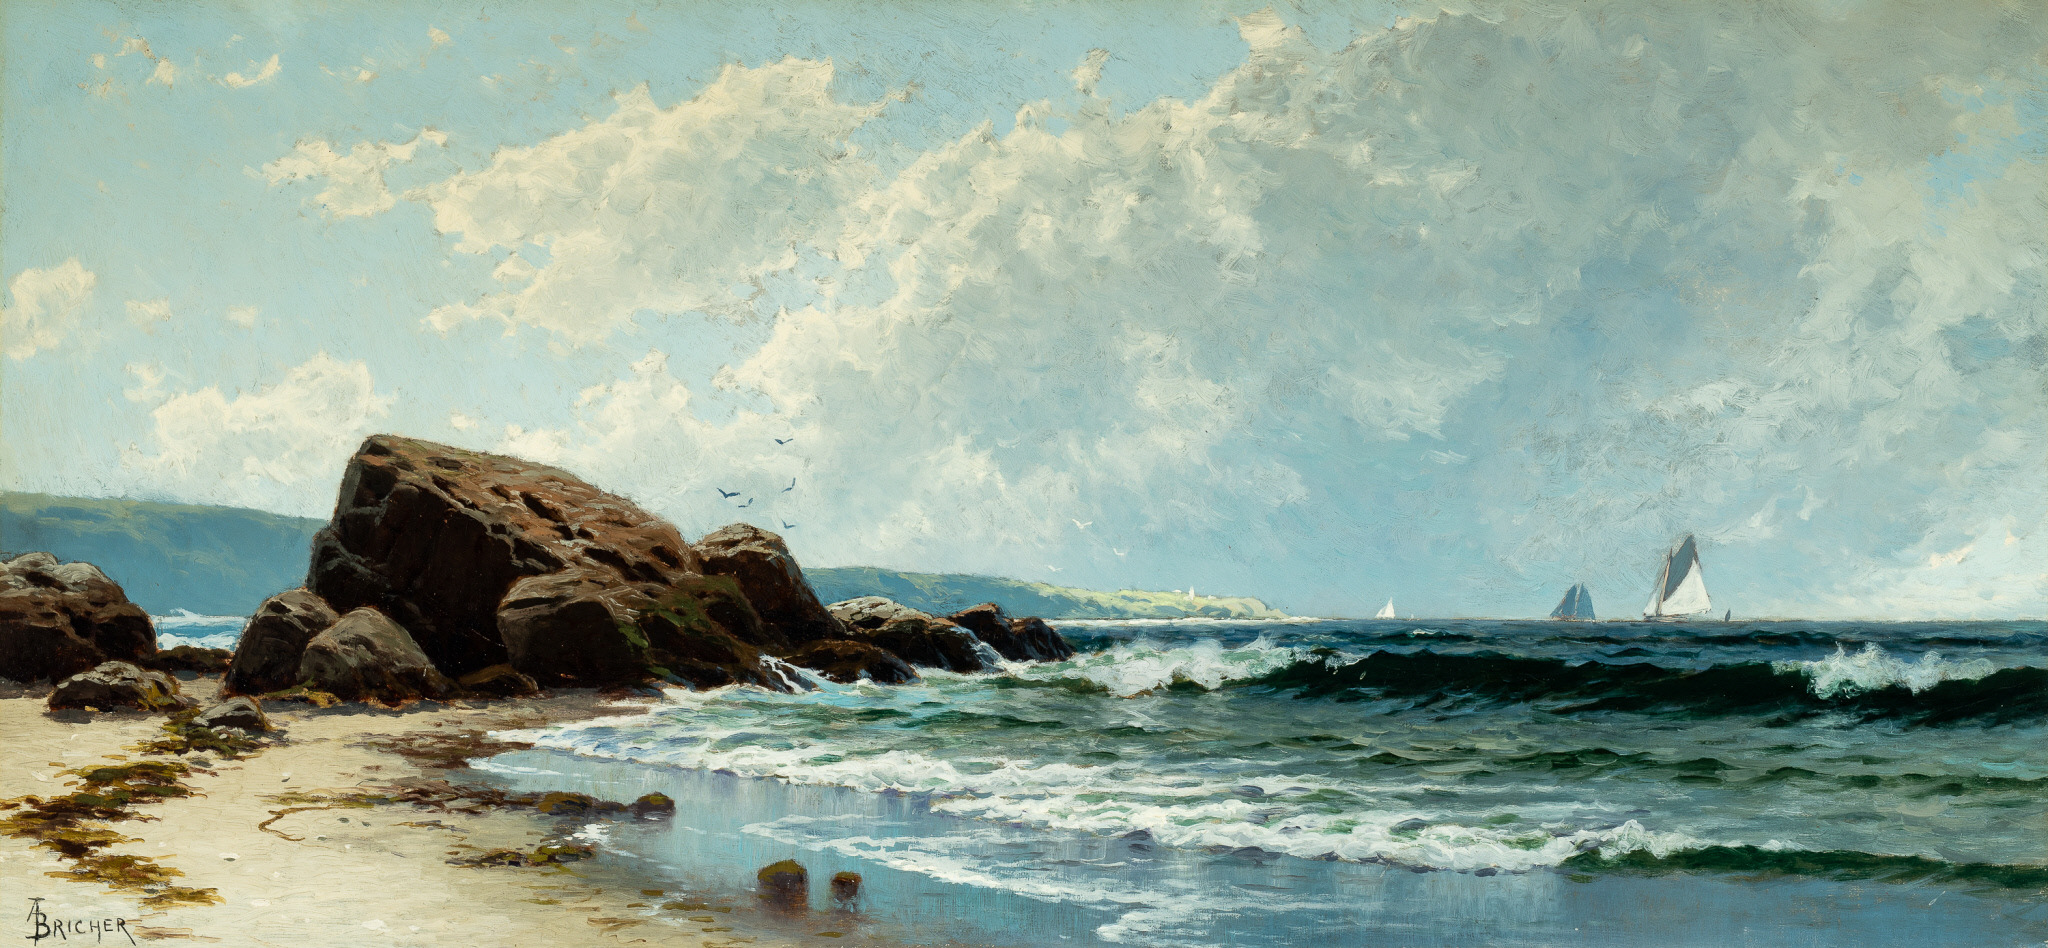 Image: Alfred Thompson Bricher (American, 1837 - 1908). Low Tide, Hetherington's Cove, Grand Manan, ca. 1881. Oil on canvas. 15 x 32 in. (38.1 x 81.3 cm). Purchased with funds provided by Elizabeth and George Coates, 74.115.